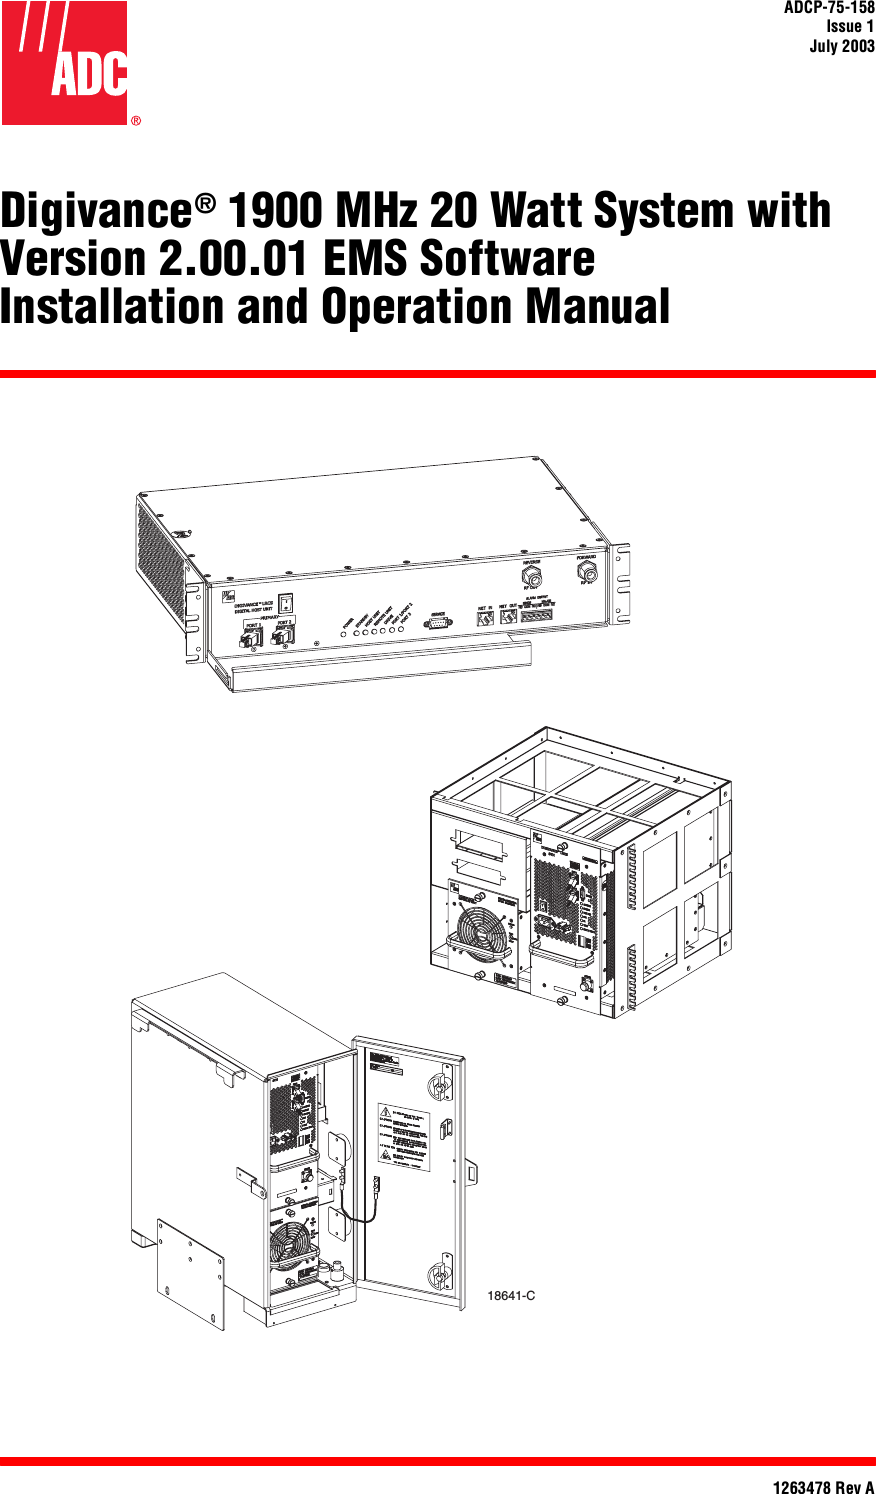 ADCP-75-158Issue 1July 20031263478 Rev ADigivance® 1900 MHz 20 Watt System withVersion 2.00.01 EMS SoftwareInstallation and Operation Manual18641-C